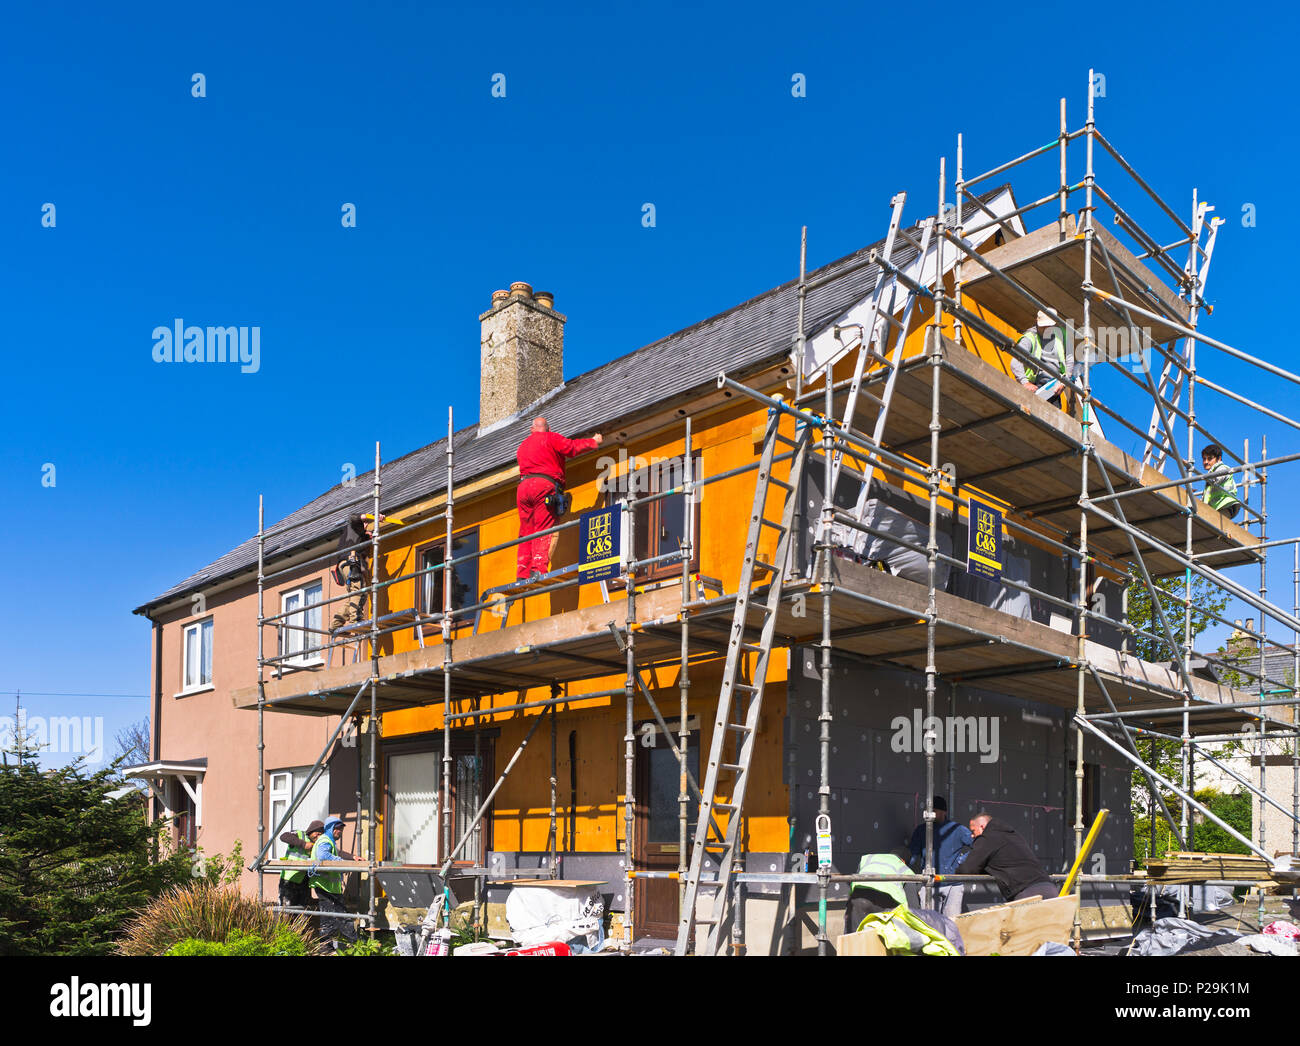 dh Heating Wall insulation BUILDING UK External thermal insulating exterior foam facade outside house walls home installation retrofit Stock Photo